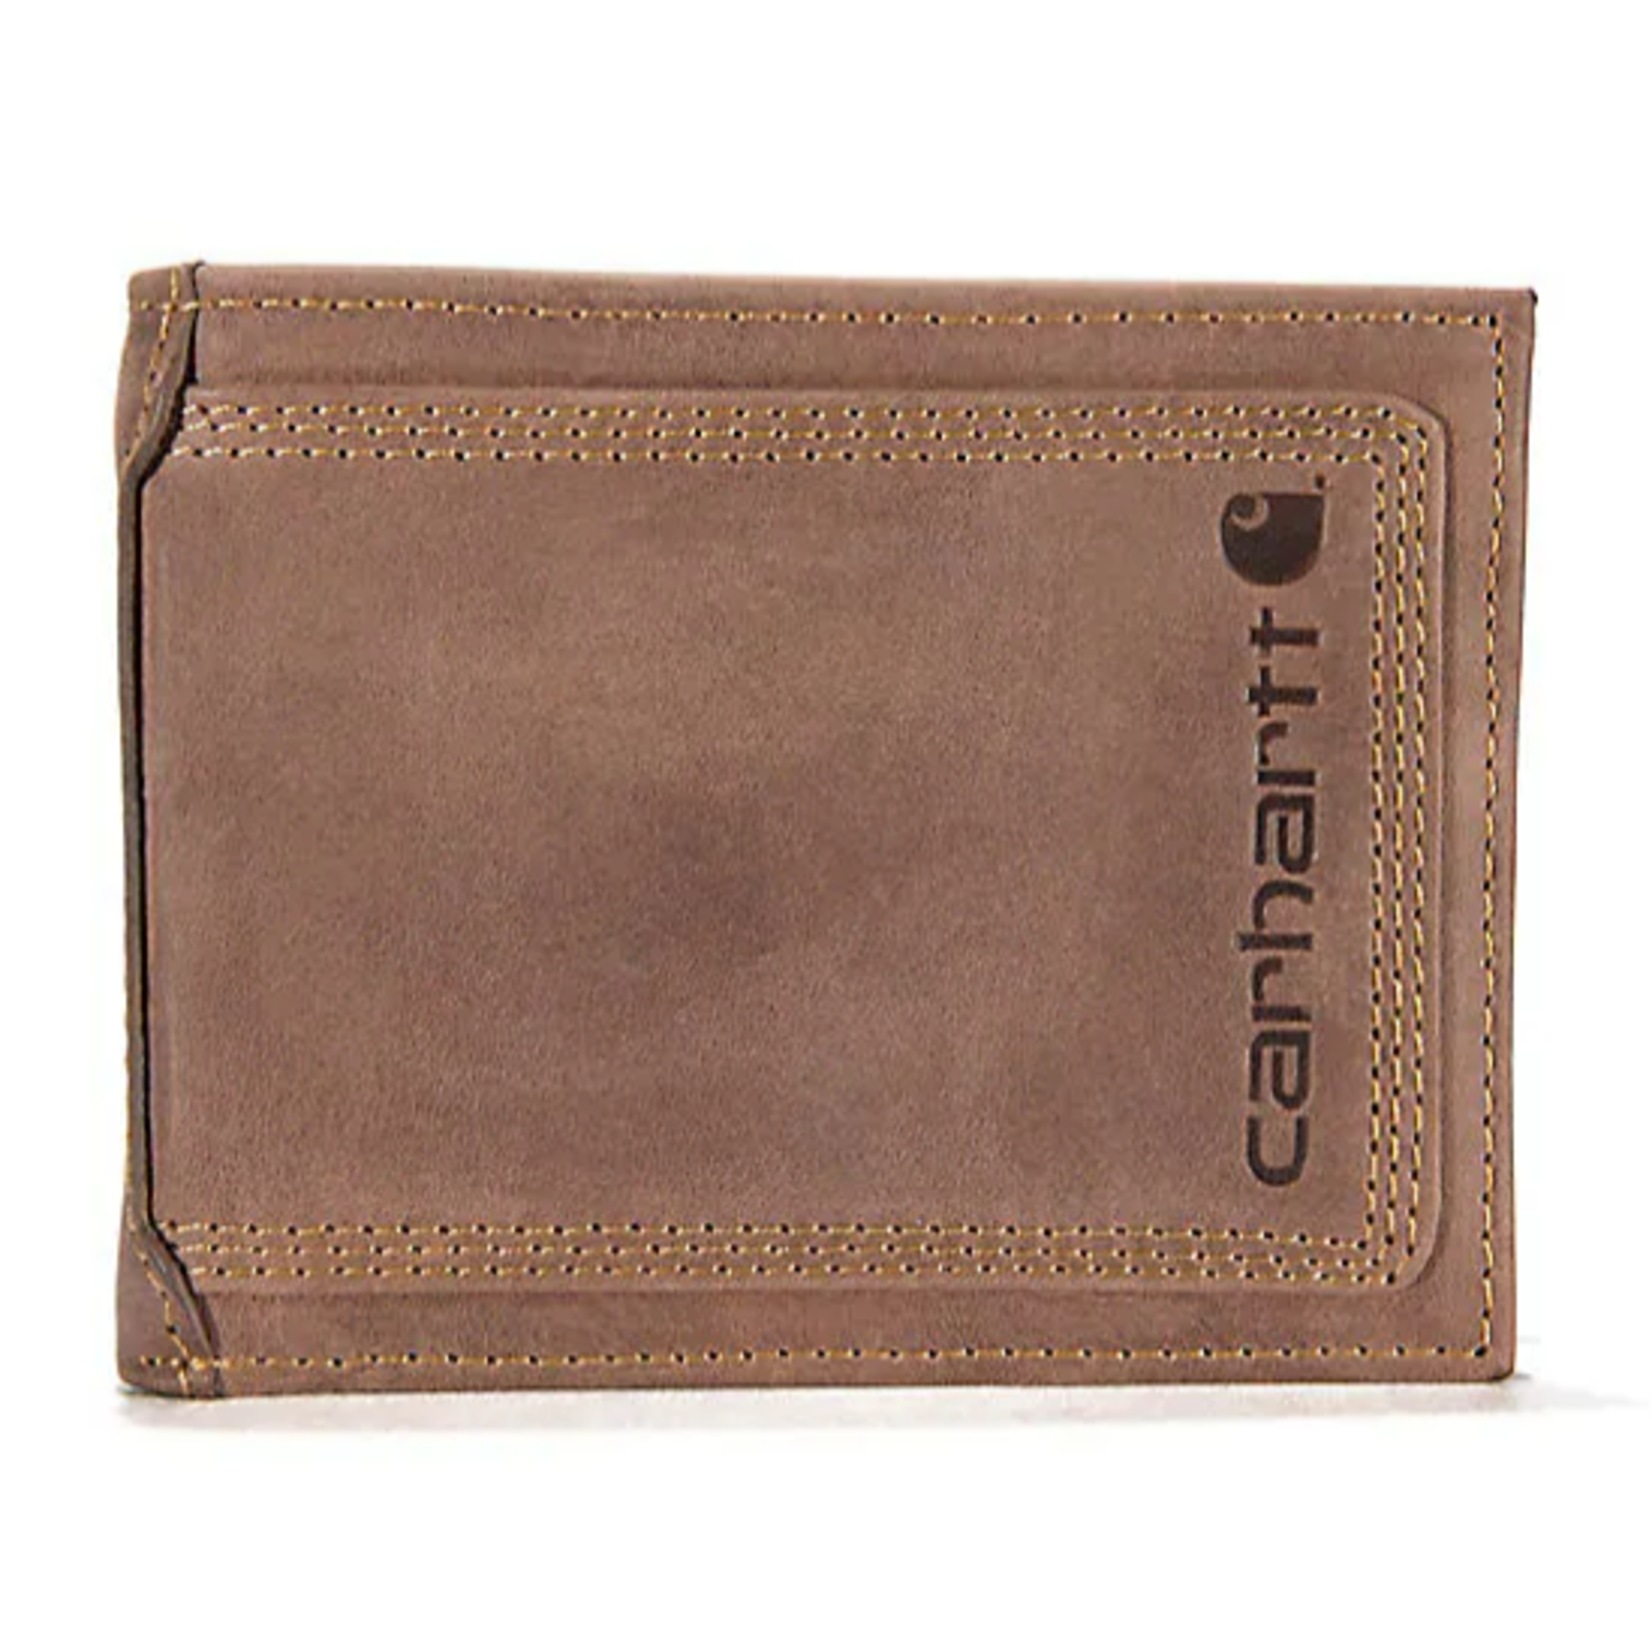 Carhartt Carhartt Leather Triple-Stitched Wallet